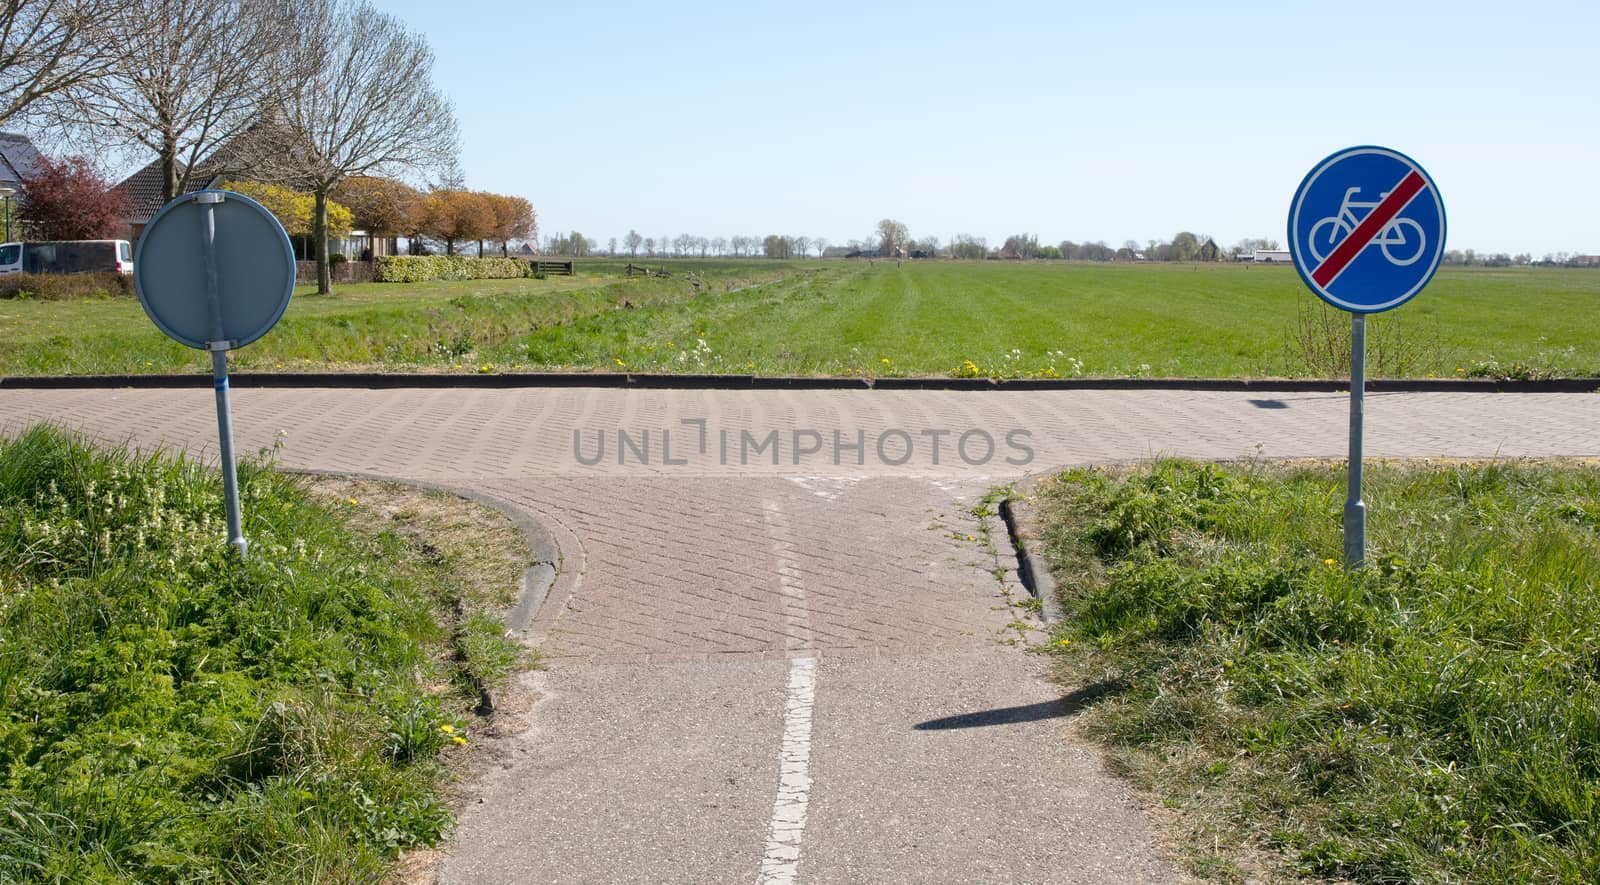 B40 - End of bicycle zone by michaklootwijk